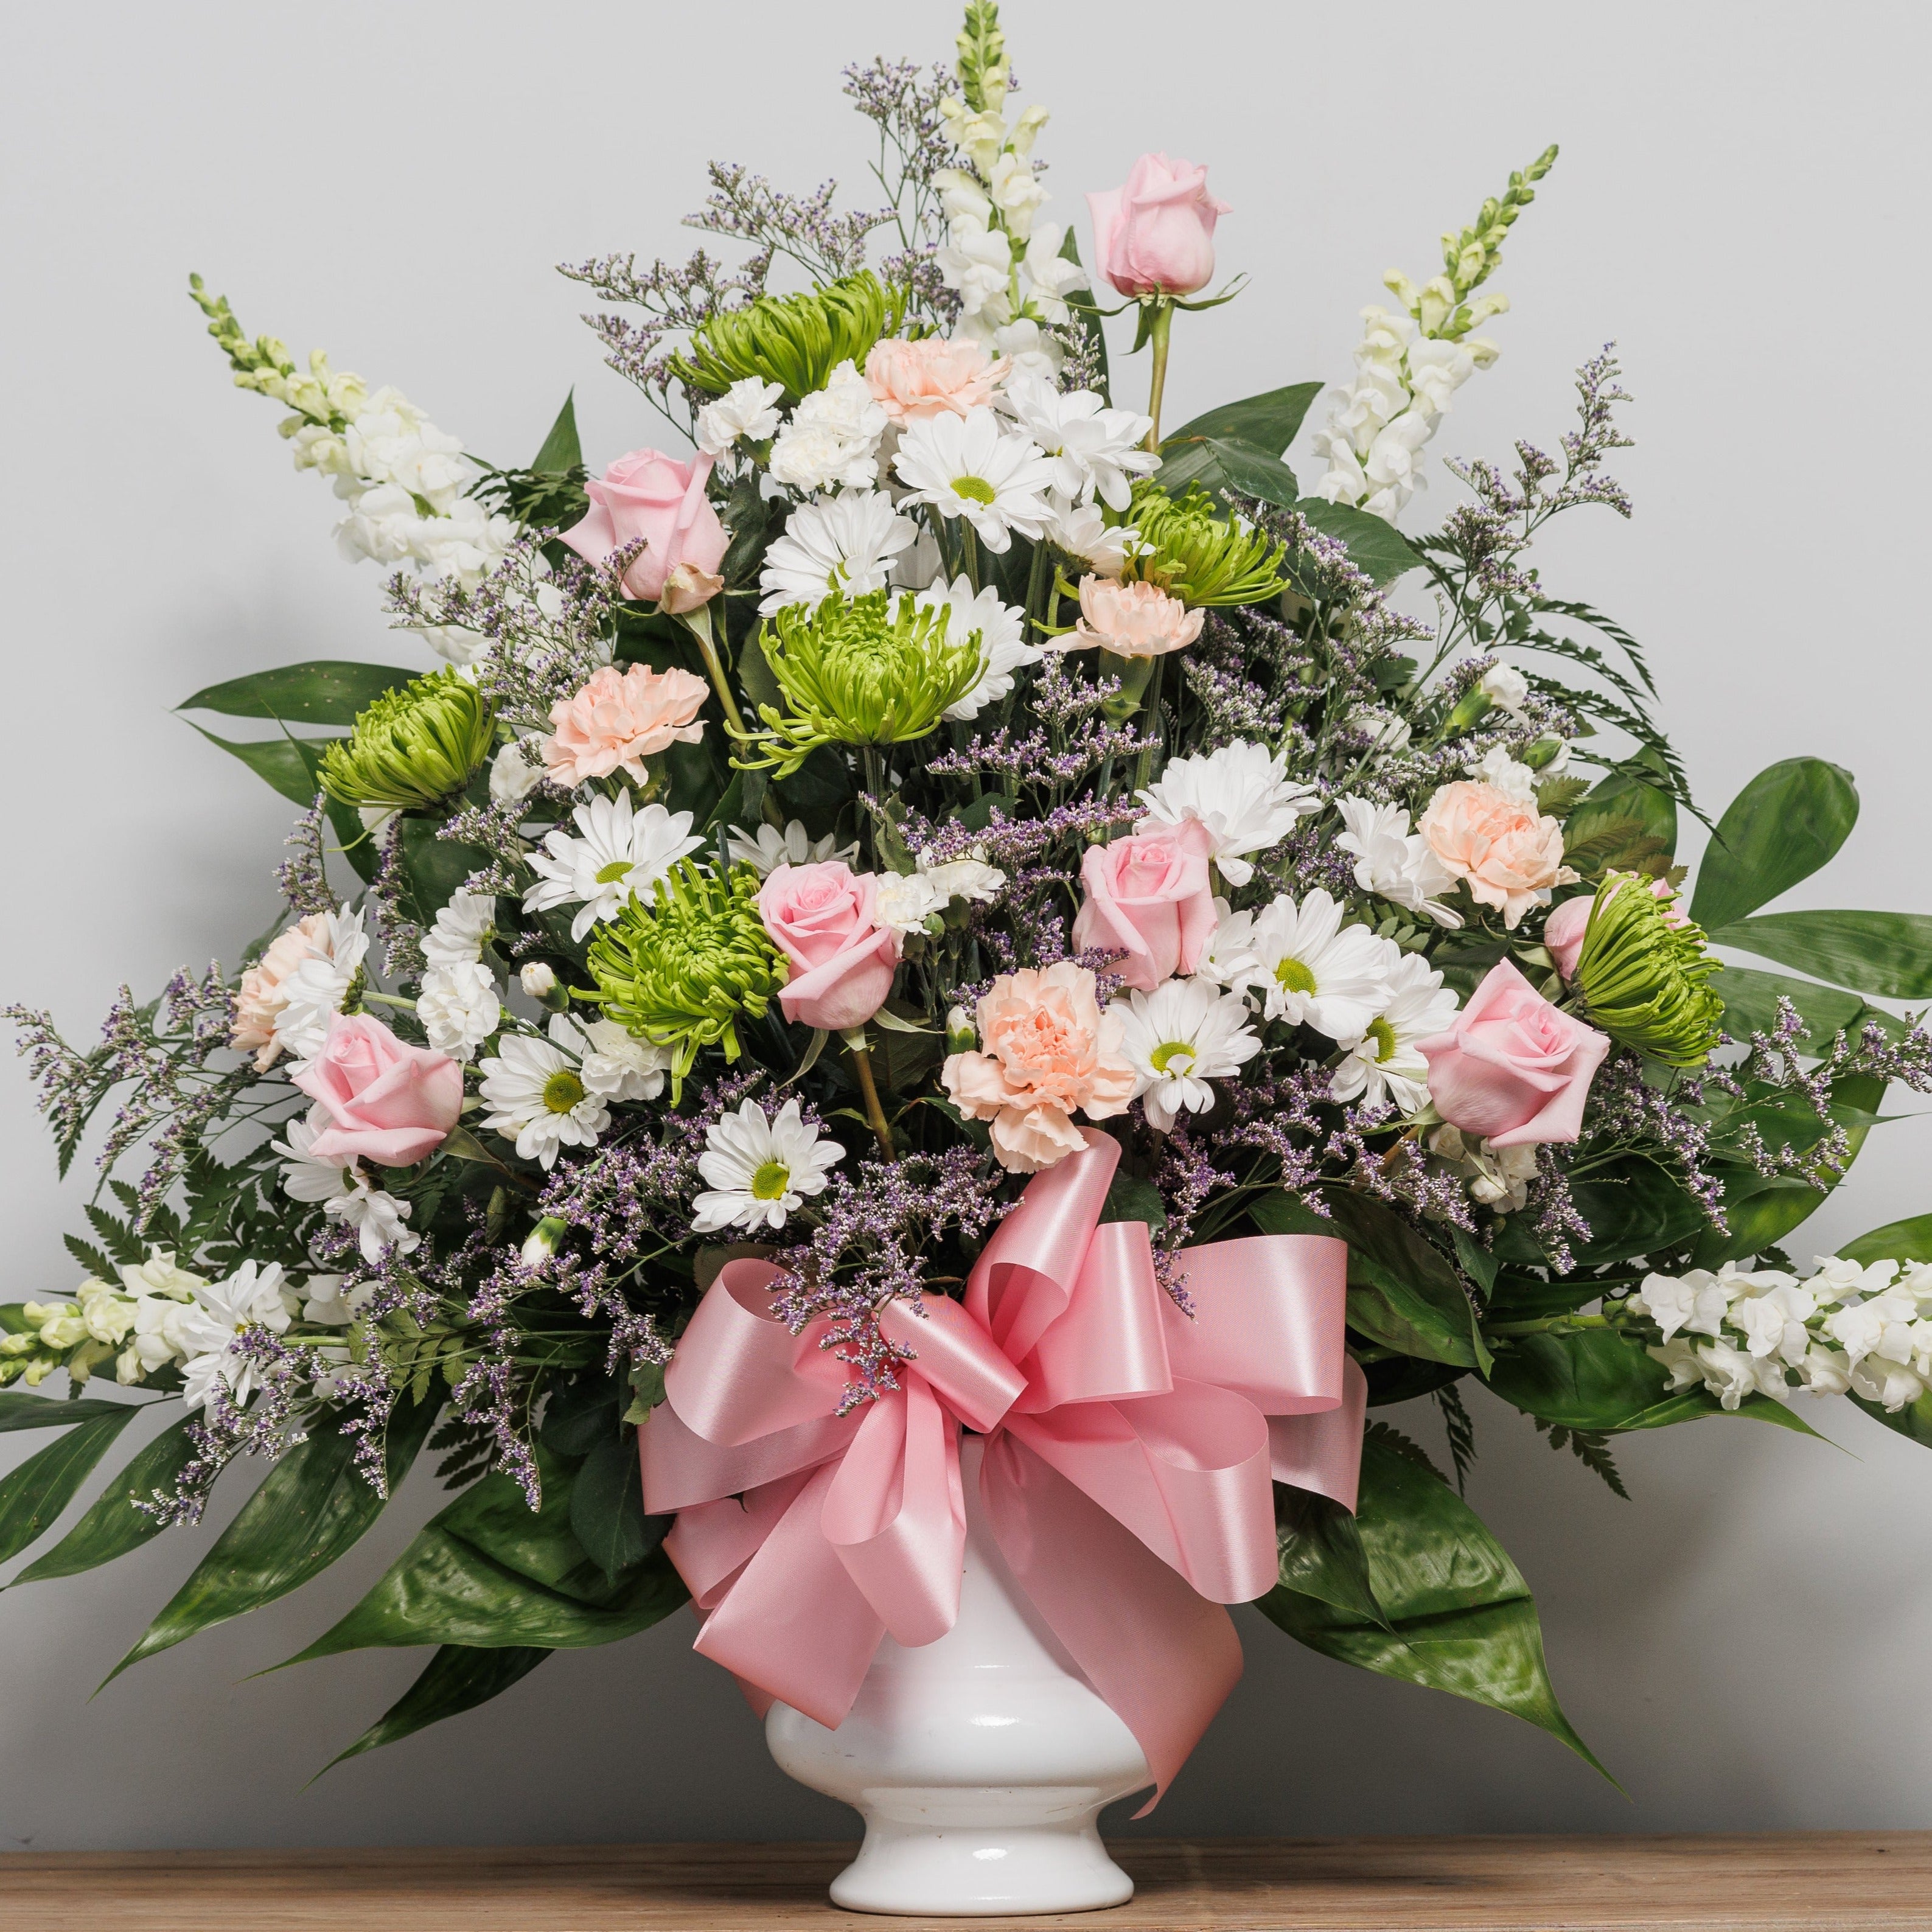 An urn arrangement with white daisies, pink roses and green mums.